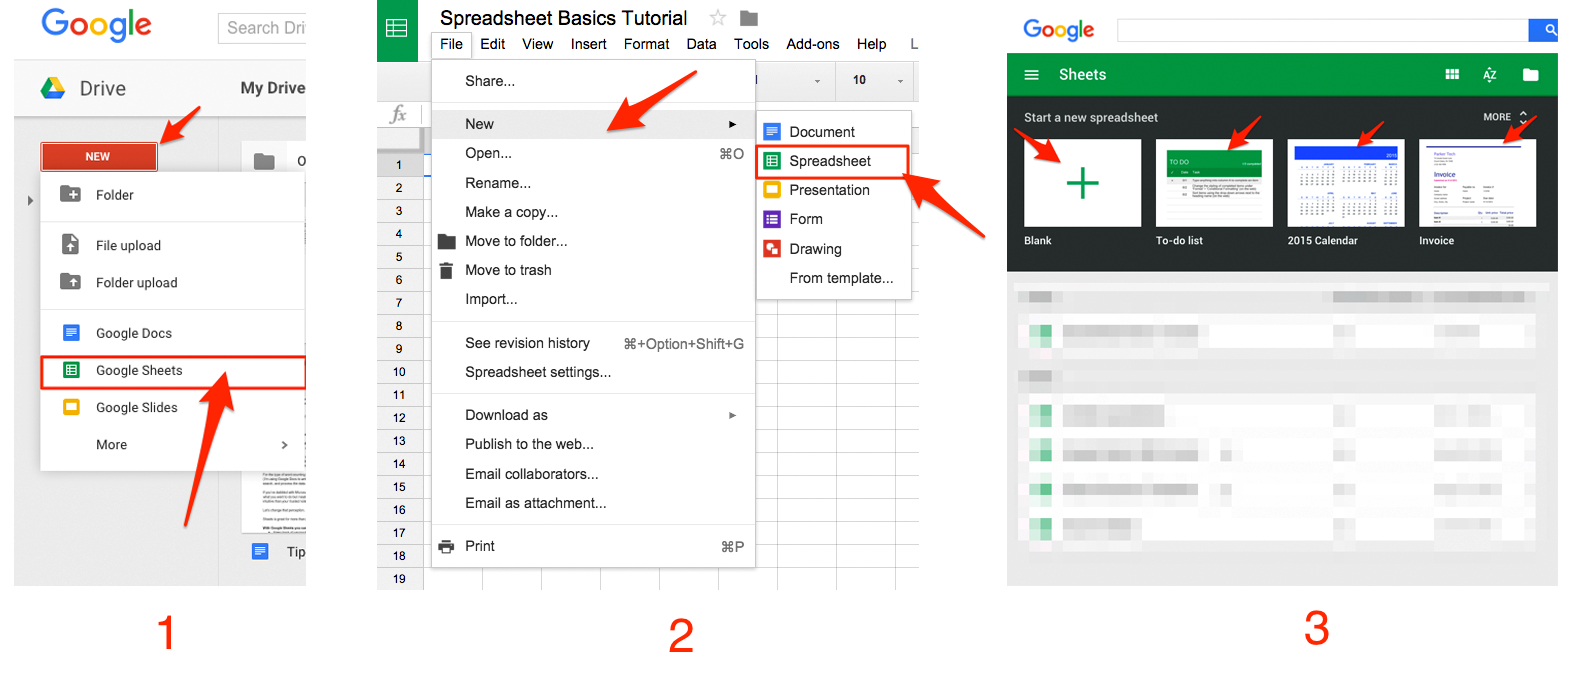 Create Google Spreadsheet Within Google Sheets 101: The Beginner's Guide To Online Spreadsheets  The